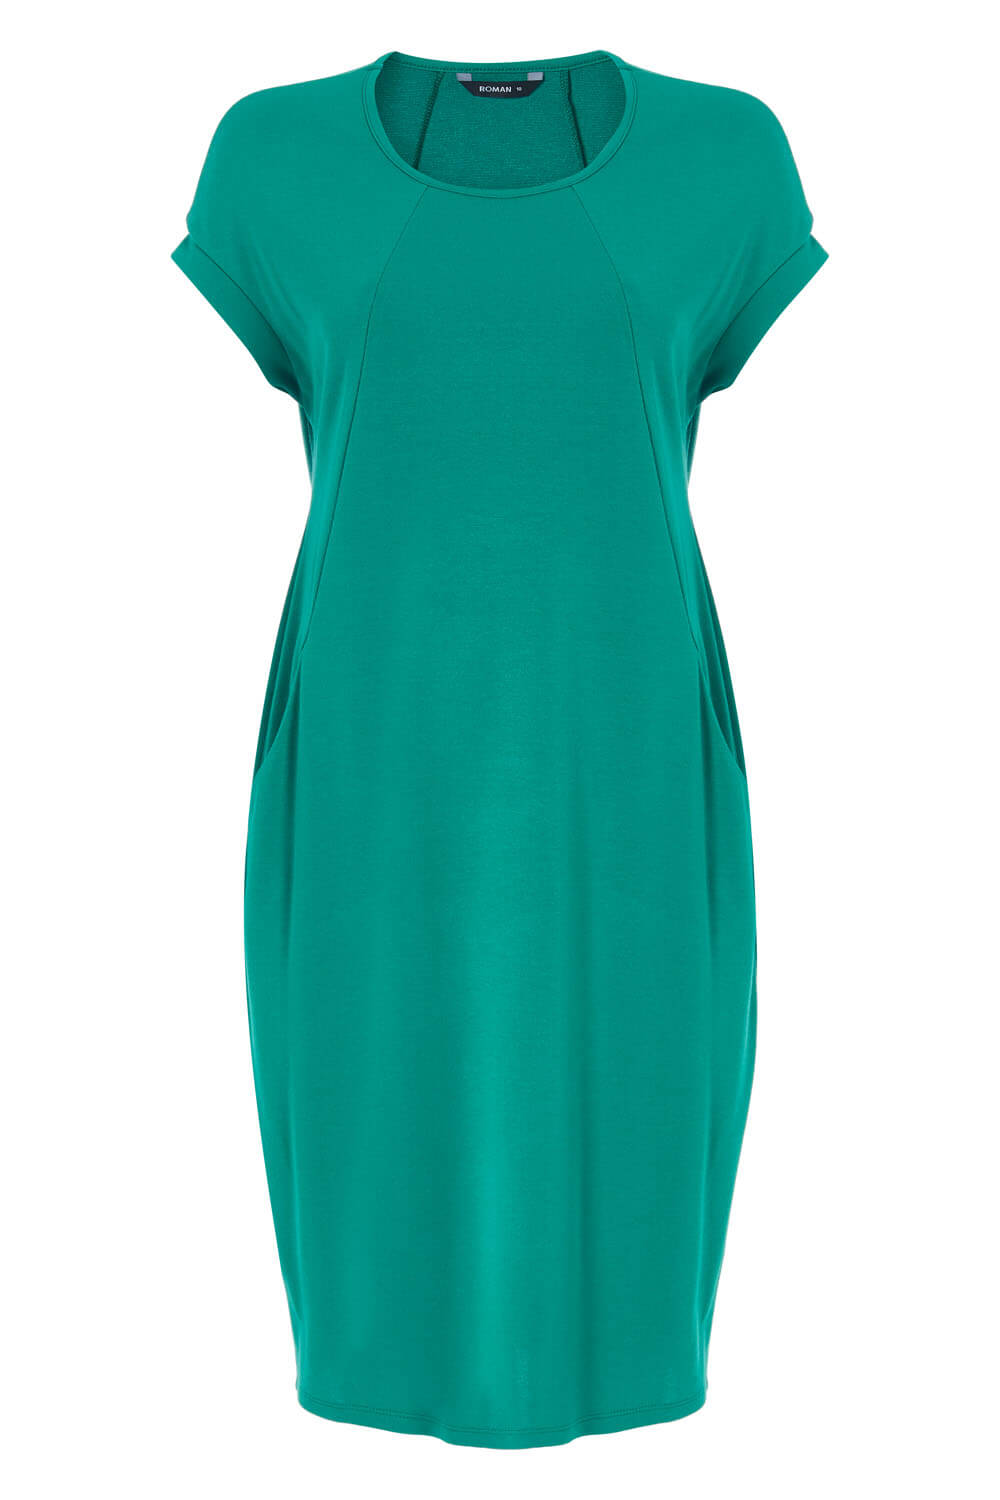 Green Relaxed Fit Crepe Dress, Image 5 of 5